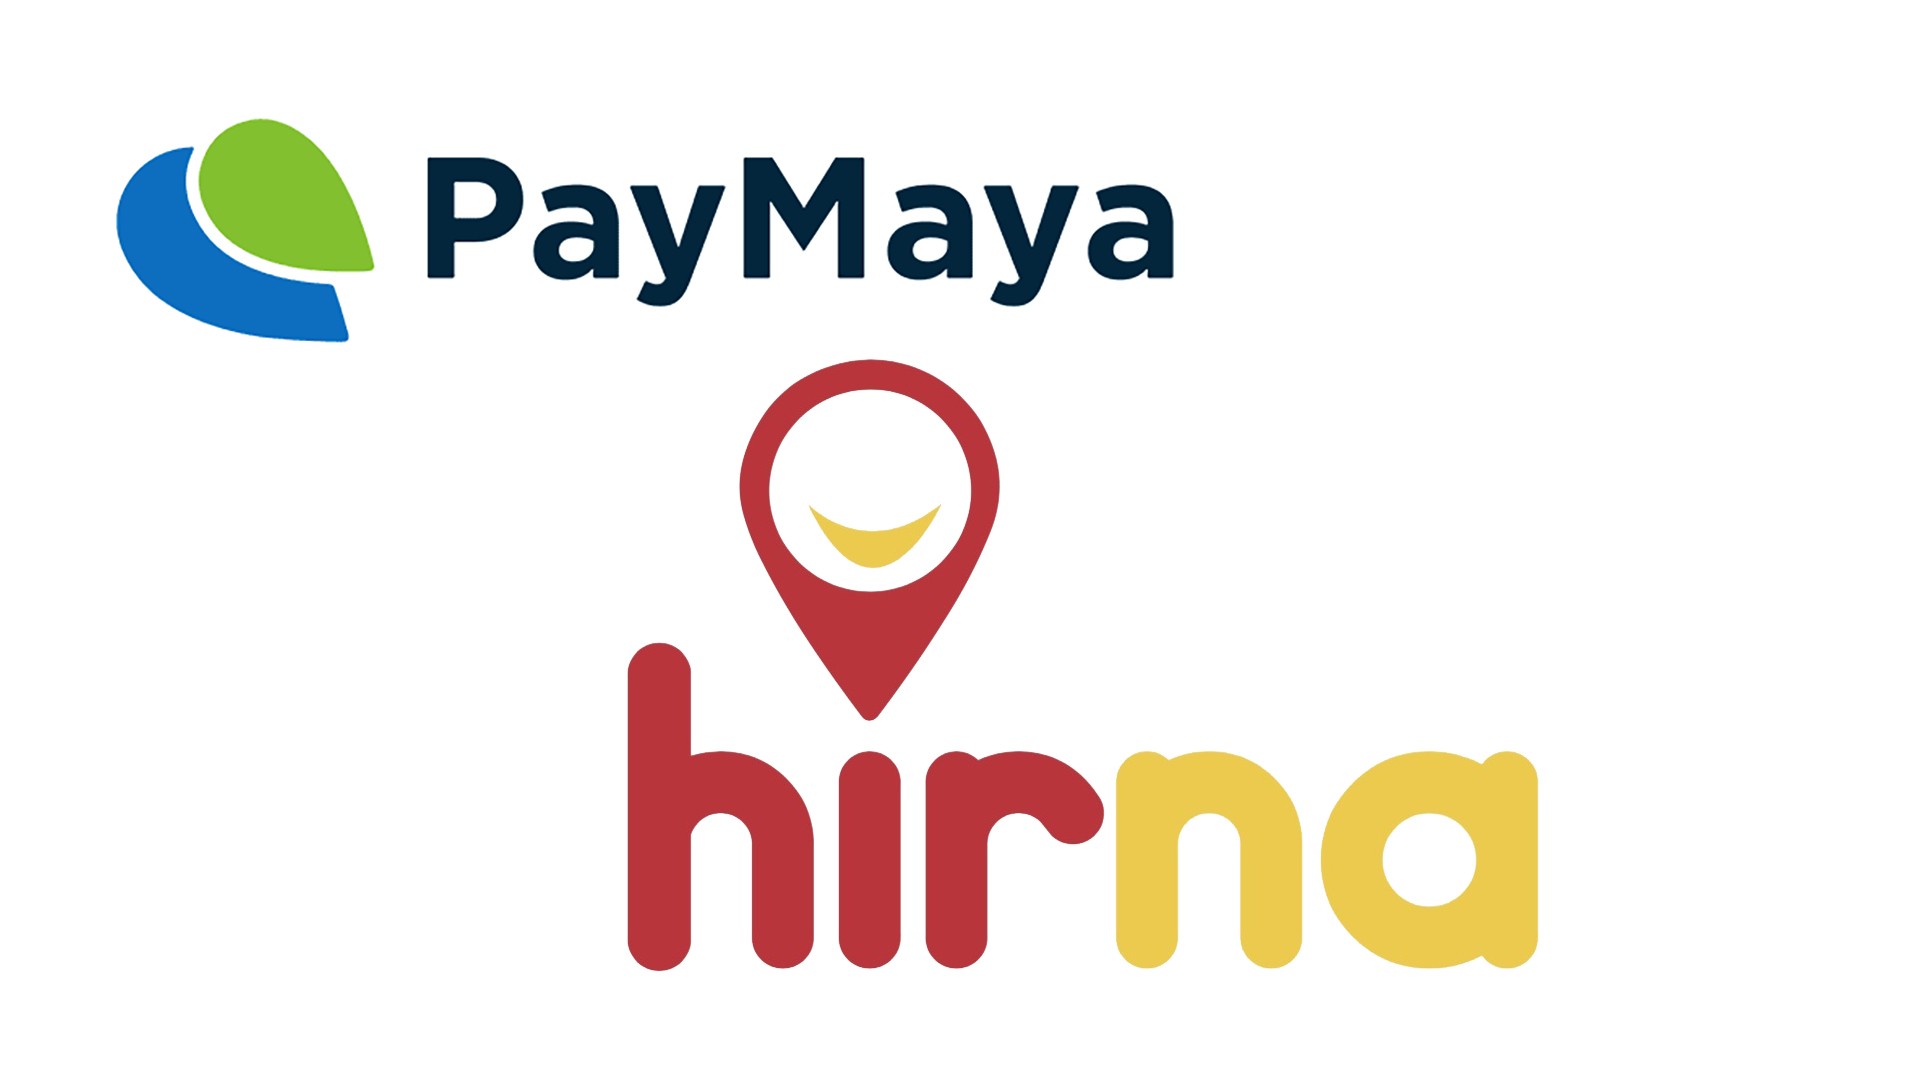 Cashless payment for your hirna taxi fare with PayMaya